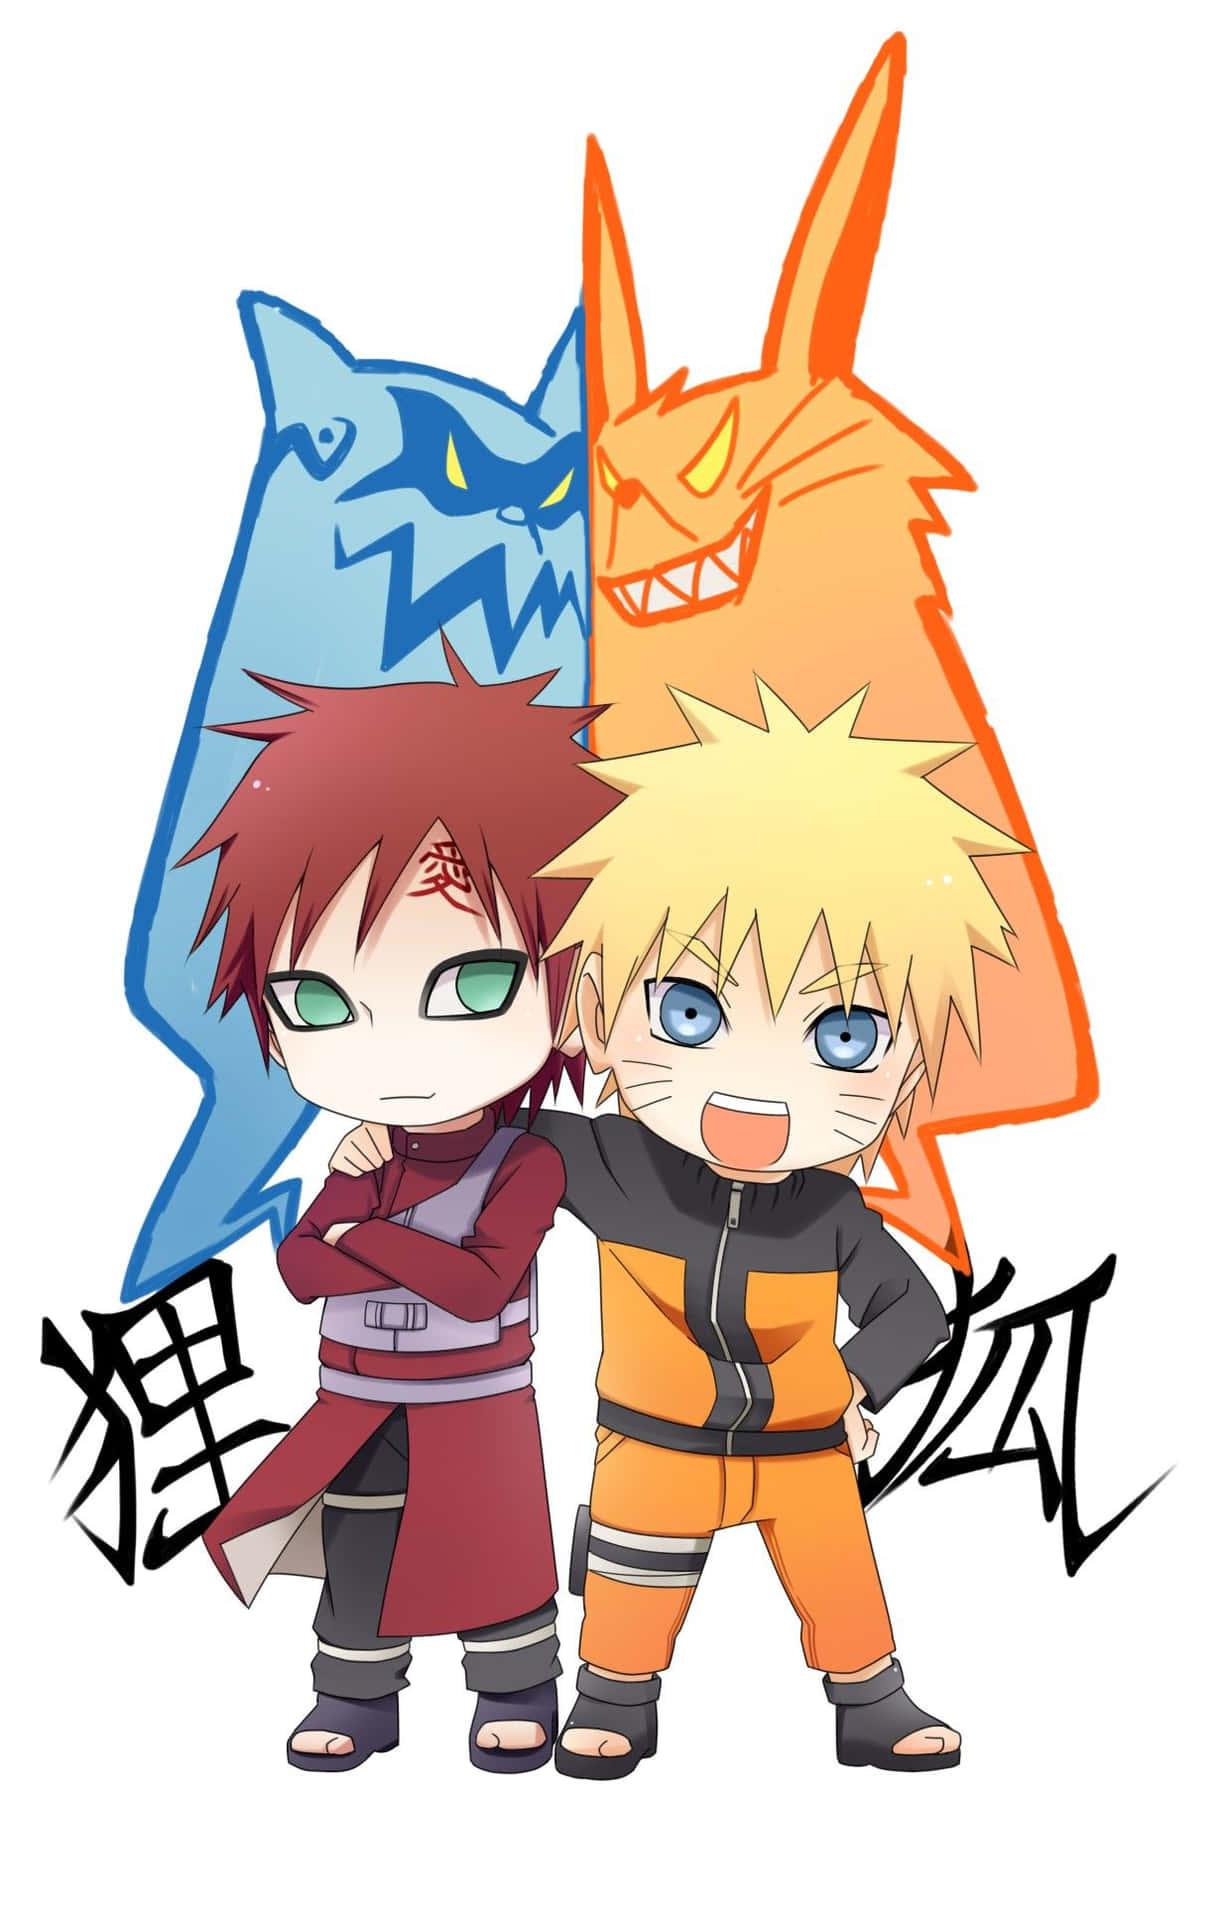 Cute And Determined Naruto Chibi Is Ready For Action